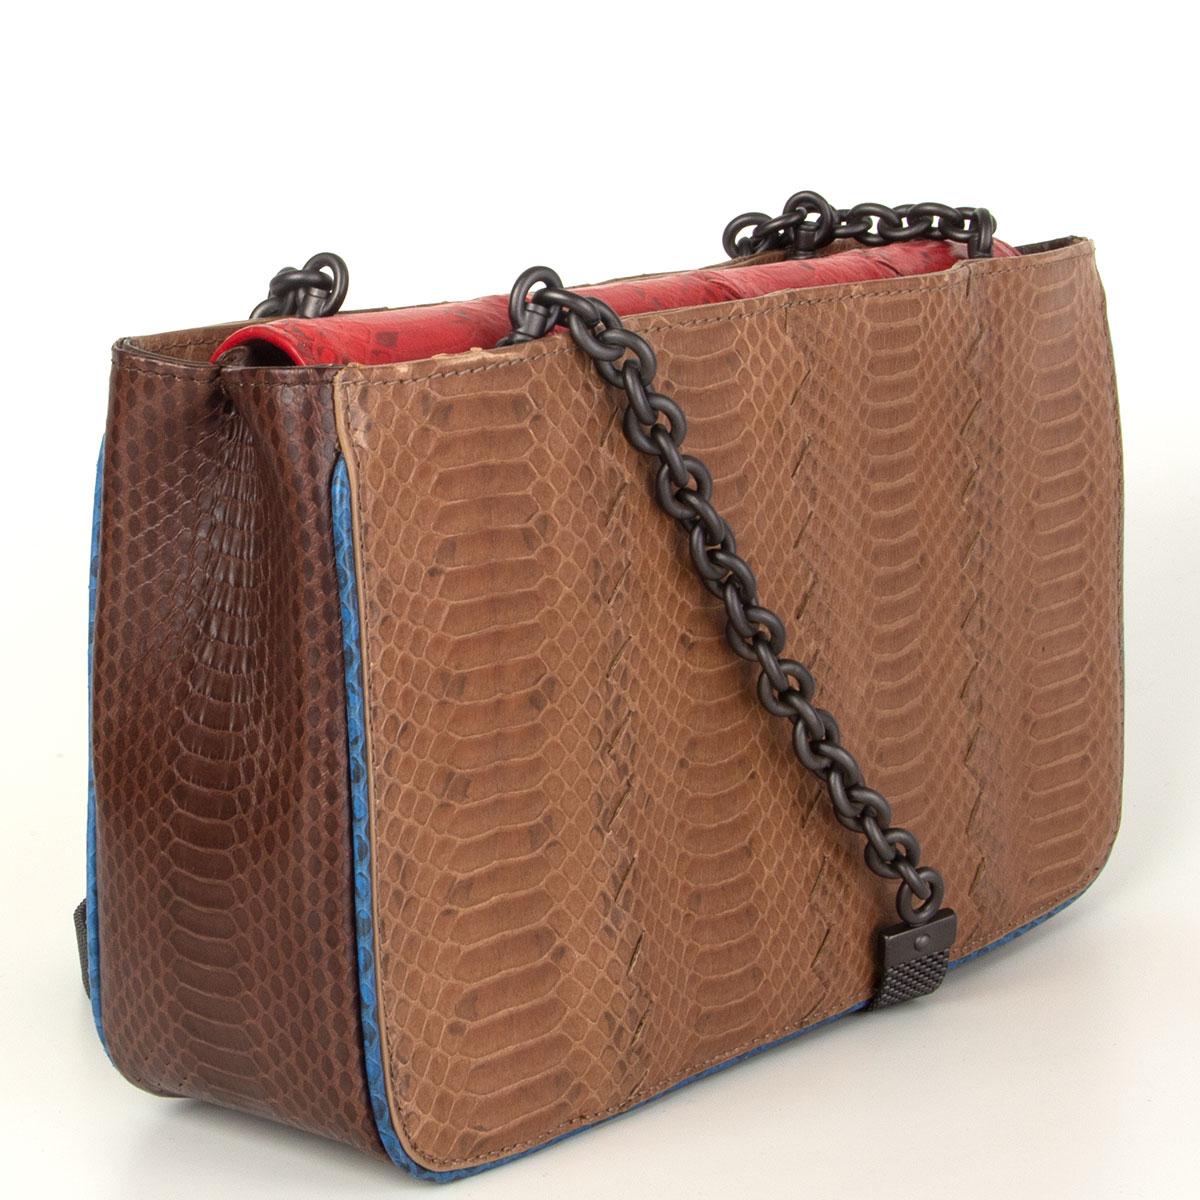 Bottega Veneta shoulder bag in brown, dark brown and red snakeskin featuring blue trim. Can be worn as a shoulder bag , clutch or crossbody bag. Opens with a magnetic flap and is lined in taupe suede. Has been carried and is in excellent condition.